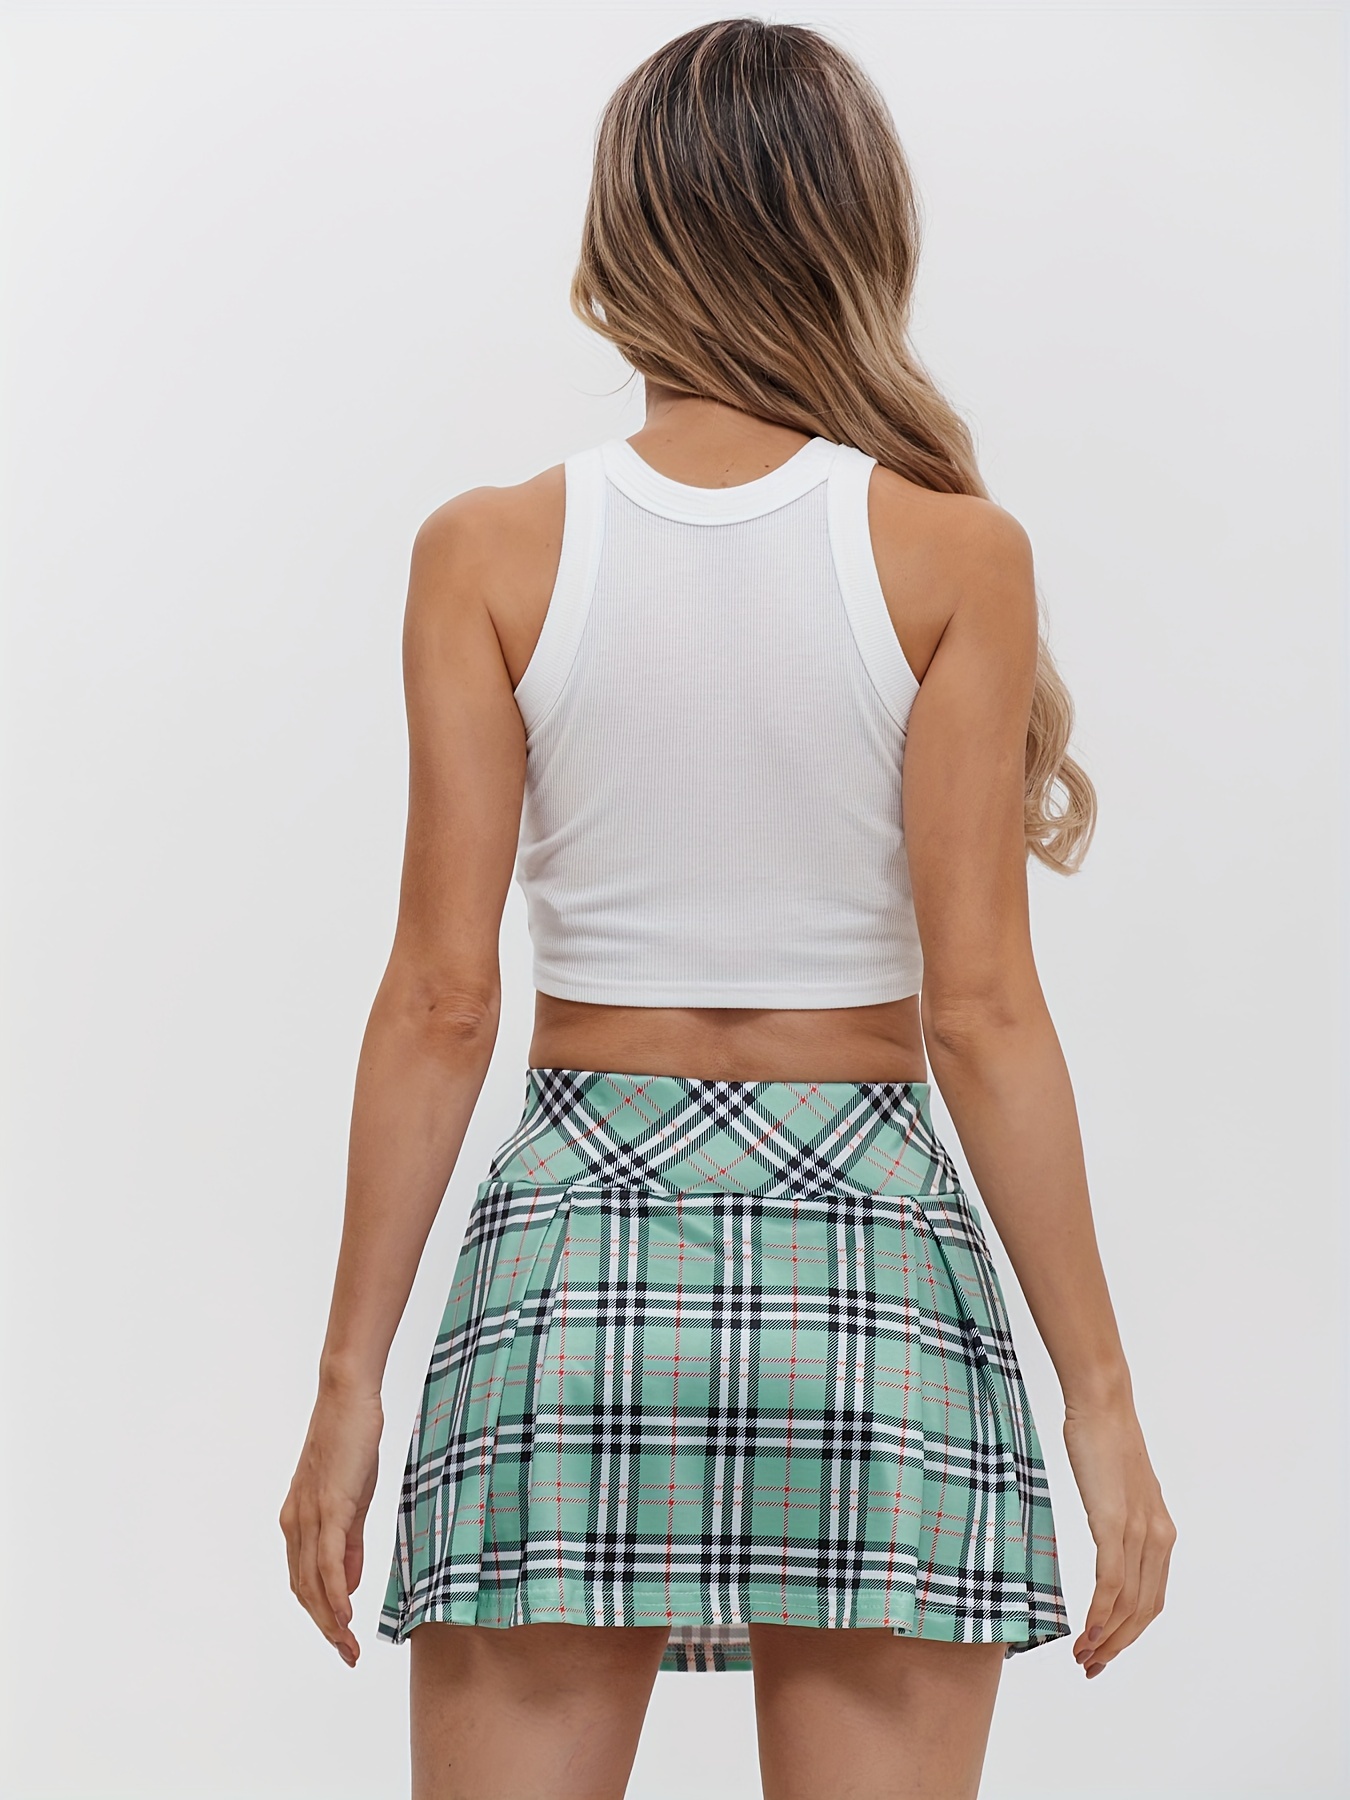 2 in 1 plaid casual sports skorts tennis running golf yoga skirts womens activewear details 1